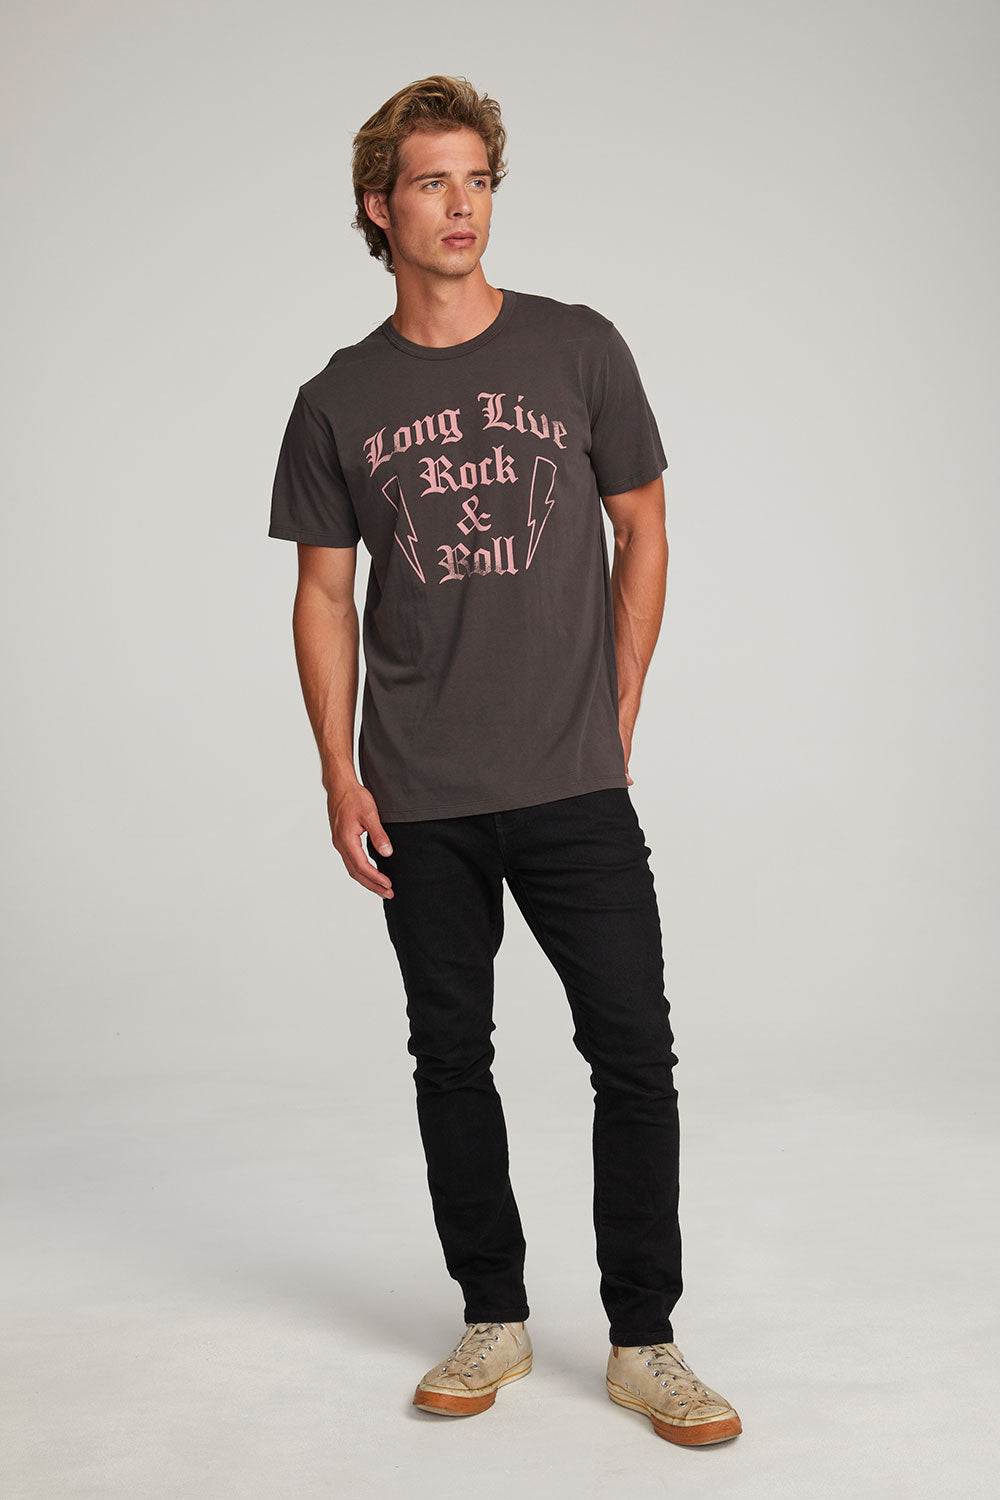 Long Live Rock Mens Tee MENS chaserbrand